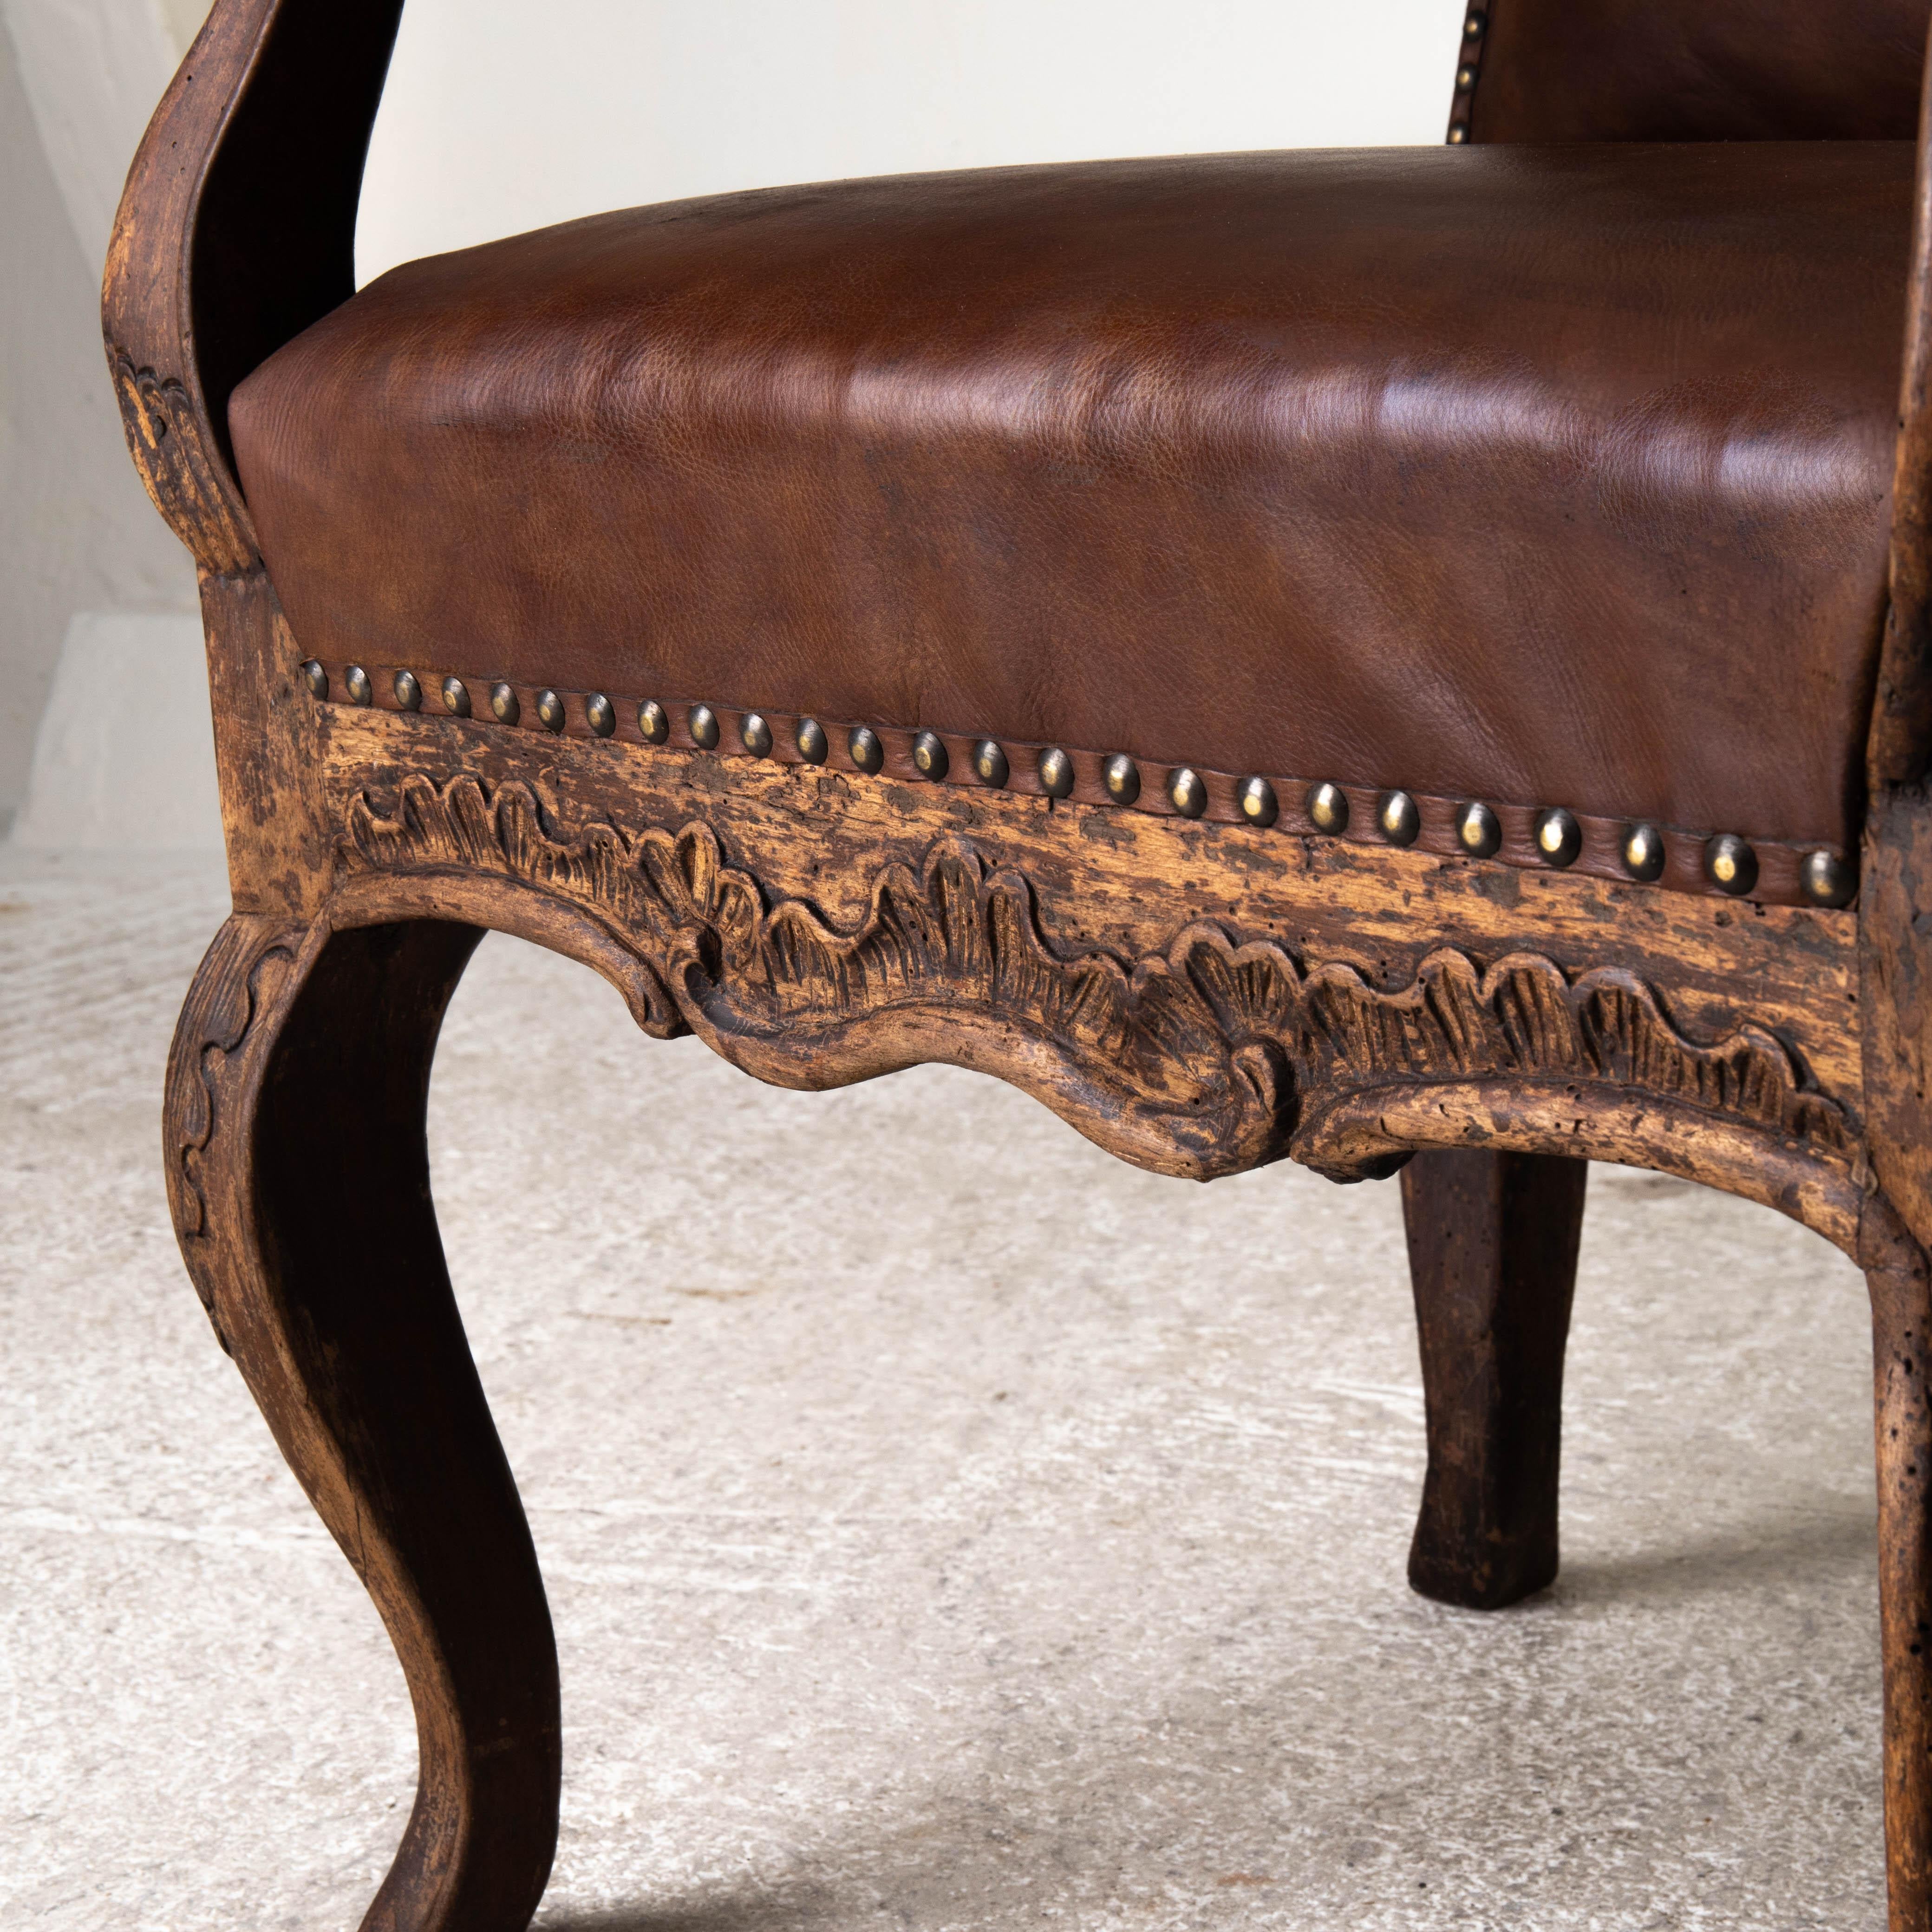 Chair Wingback Swedish Rococo Period 1750-1775 Brown Leather Sweden For Sale 7